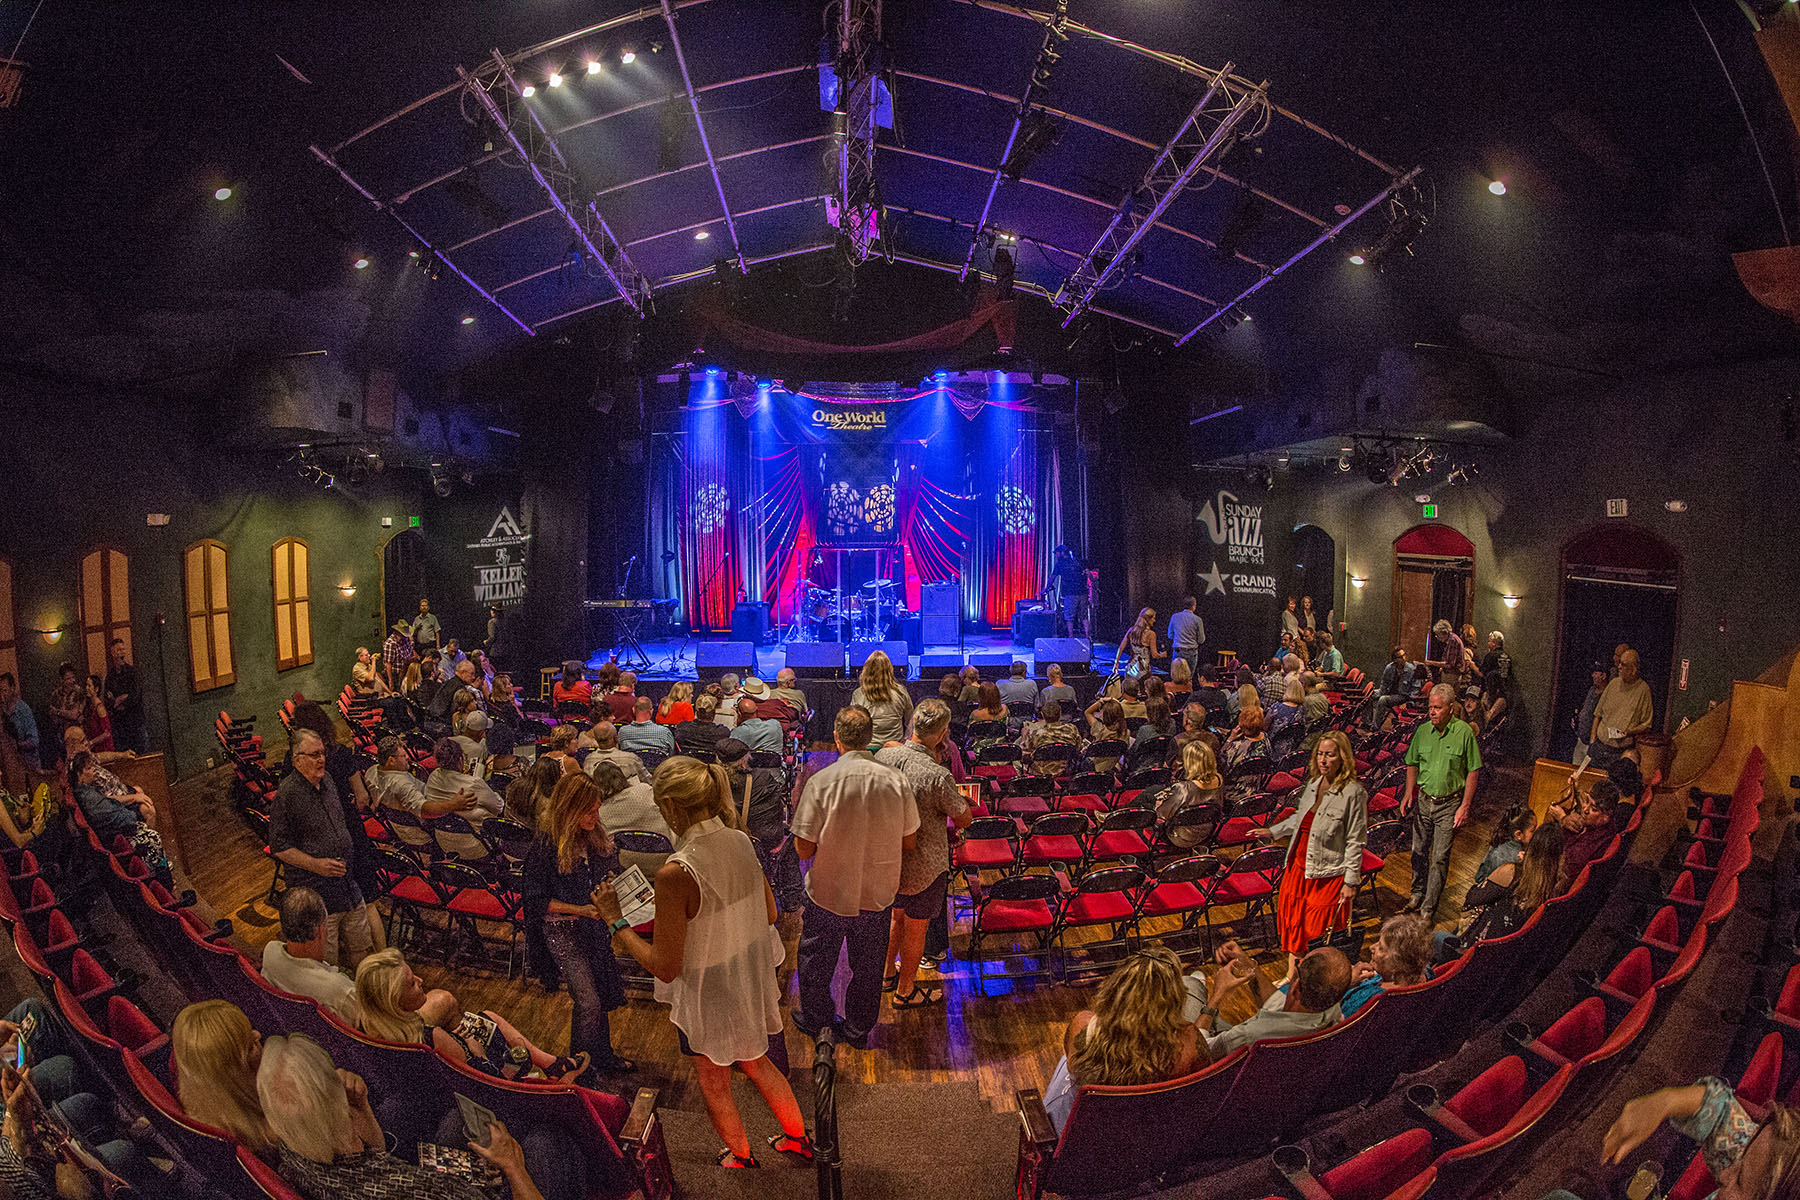 From the balcony at Austin's One World Theatre. Photo: Will Taylor - LostinAustin.org